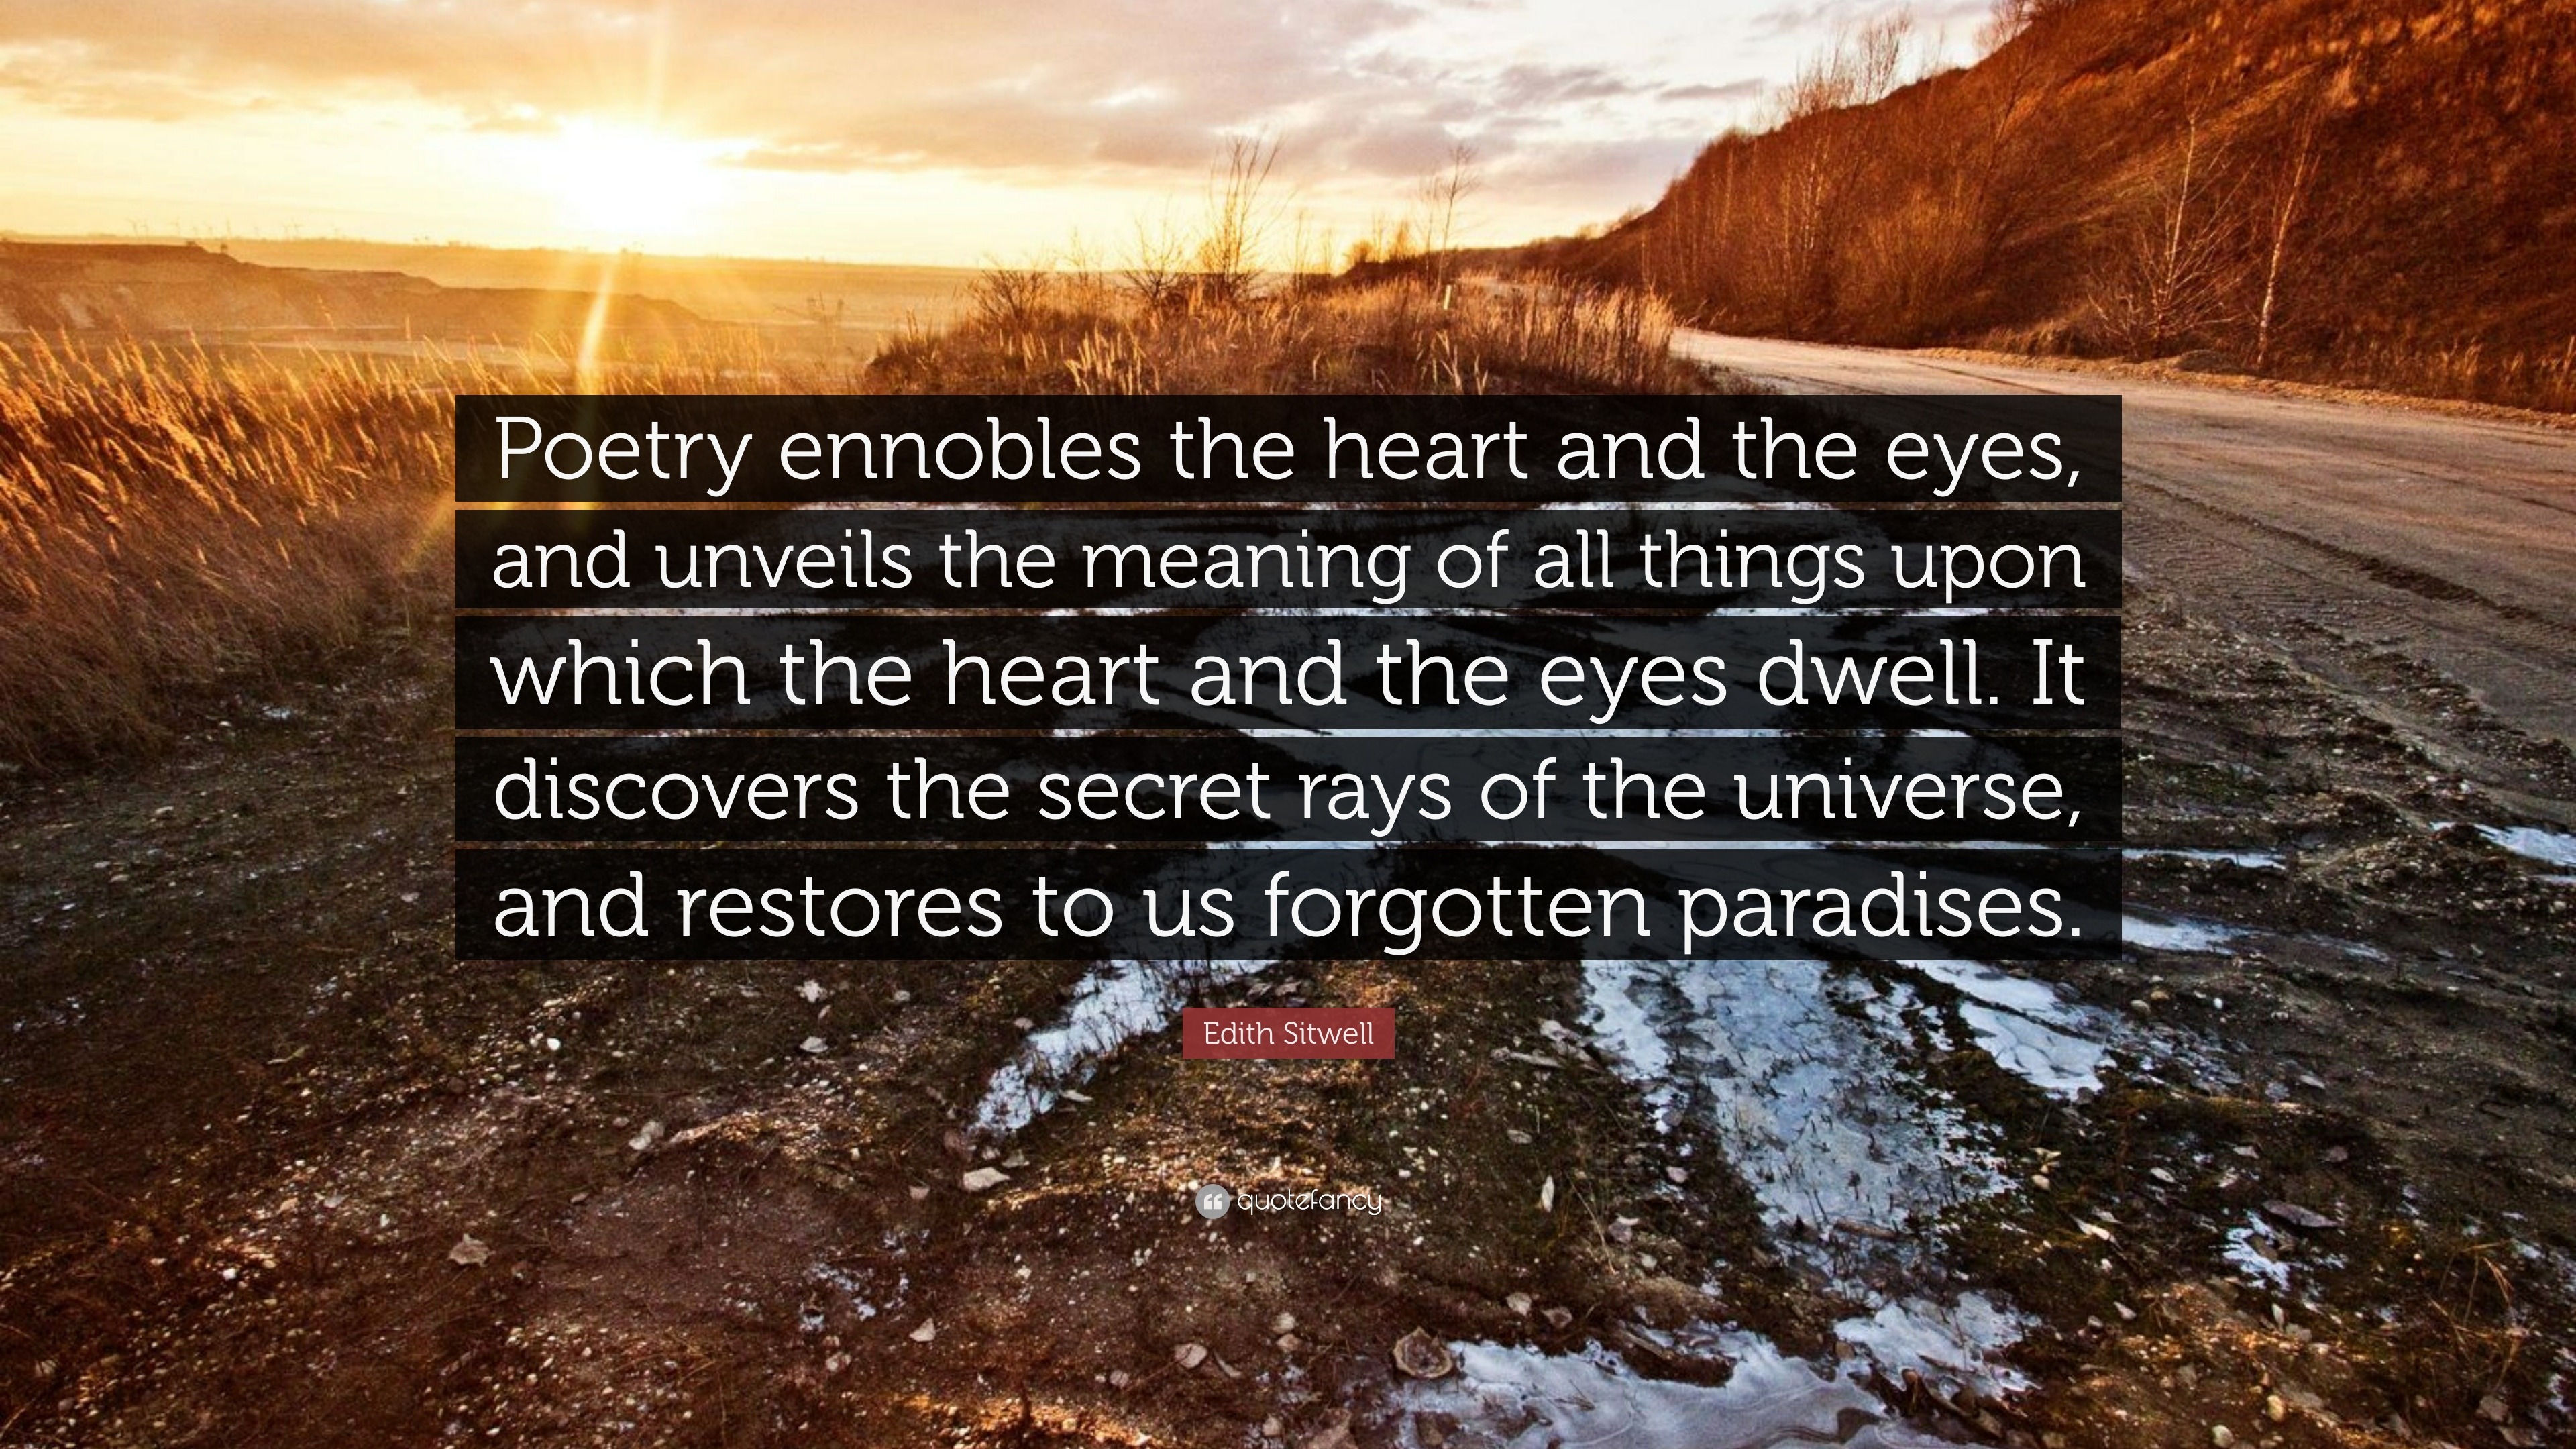 Edith Sitwell Quote: “Poetry ennobles the heart and the eyes, and